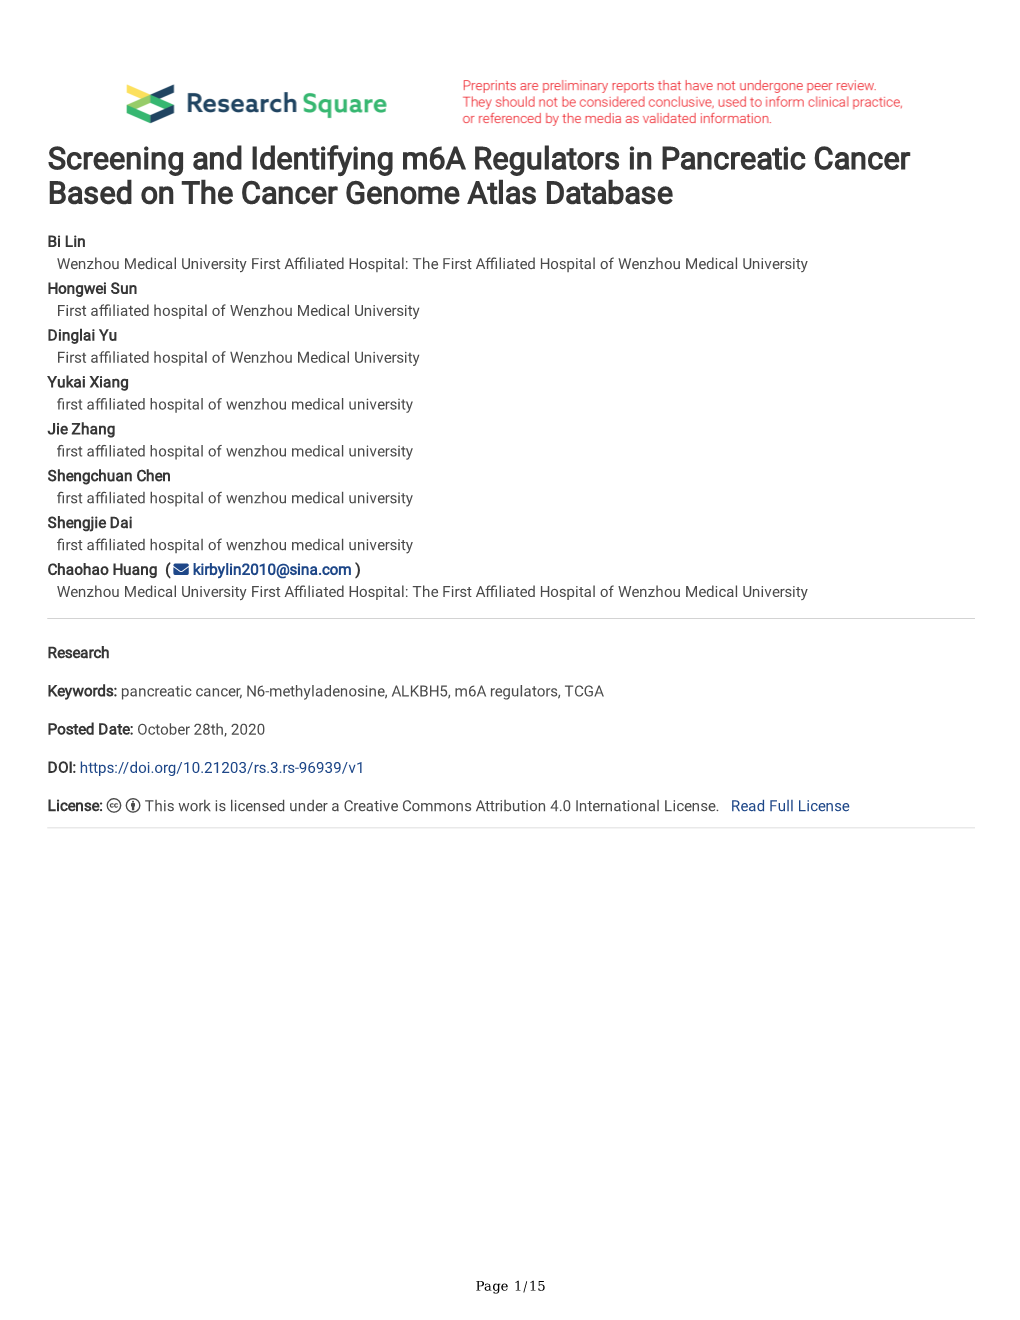 Screening and Identifying M6a Regulators in Pancreatic Cancer Based on the Cancer Genome Atlas Database